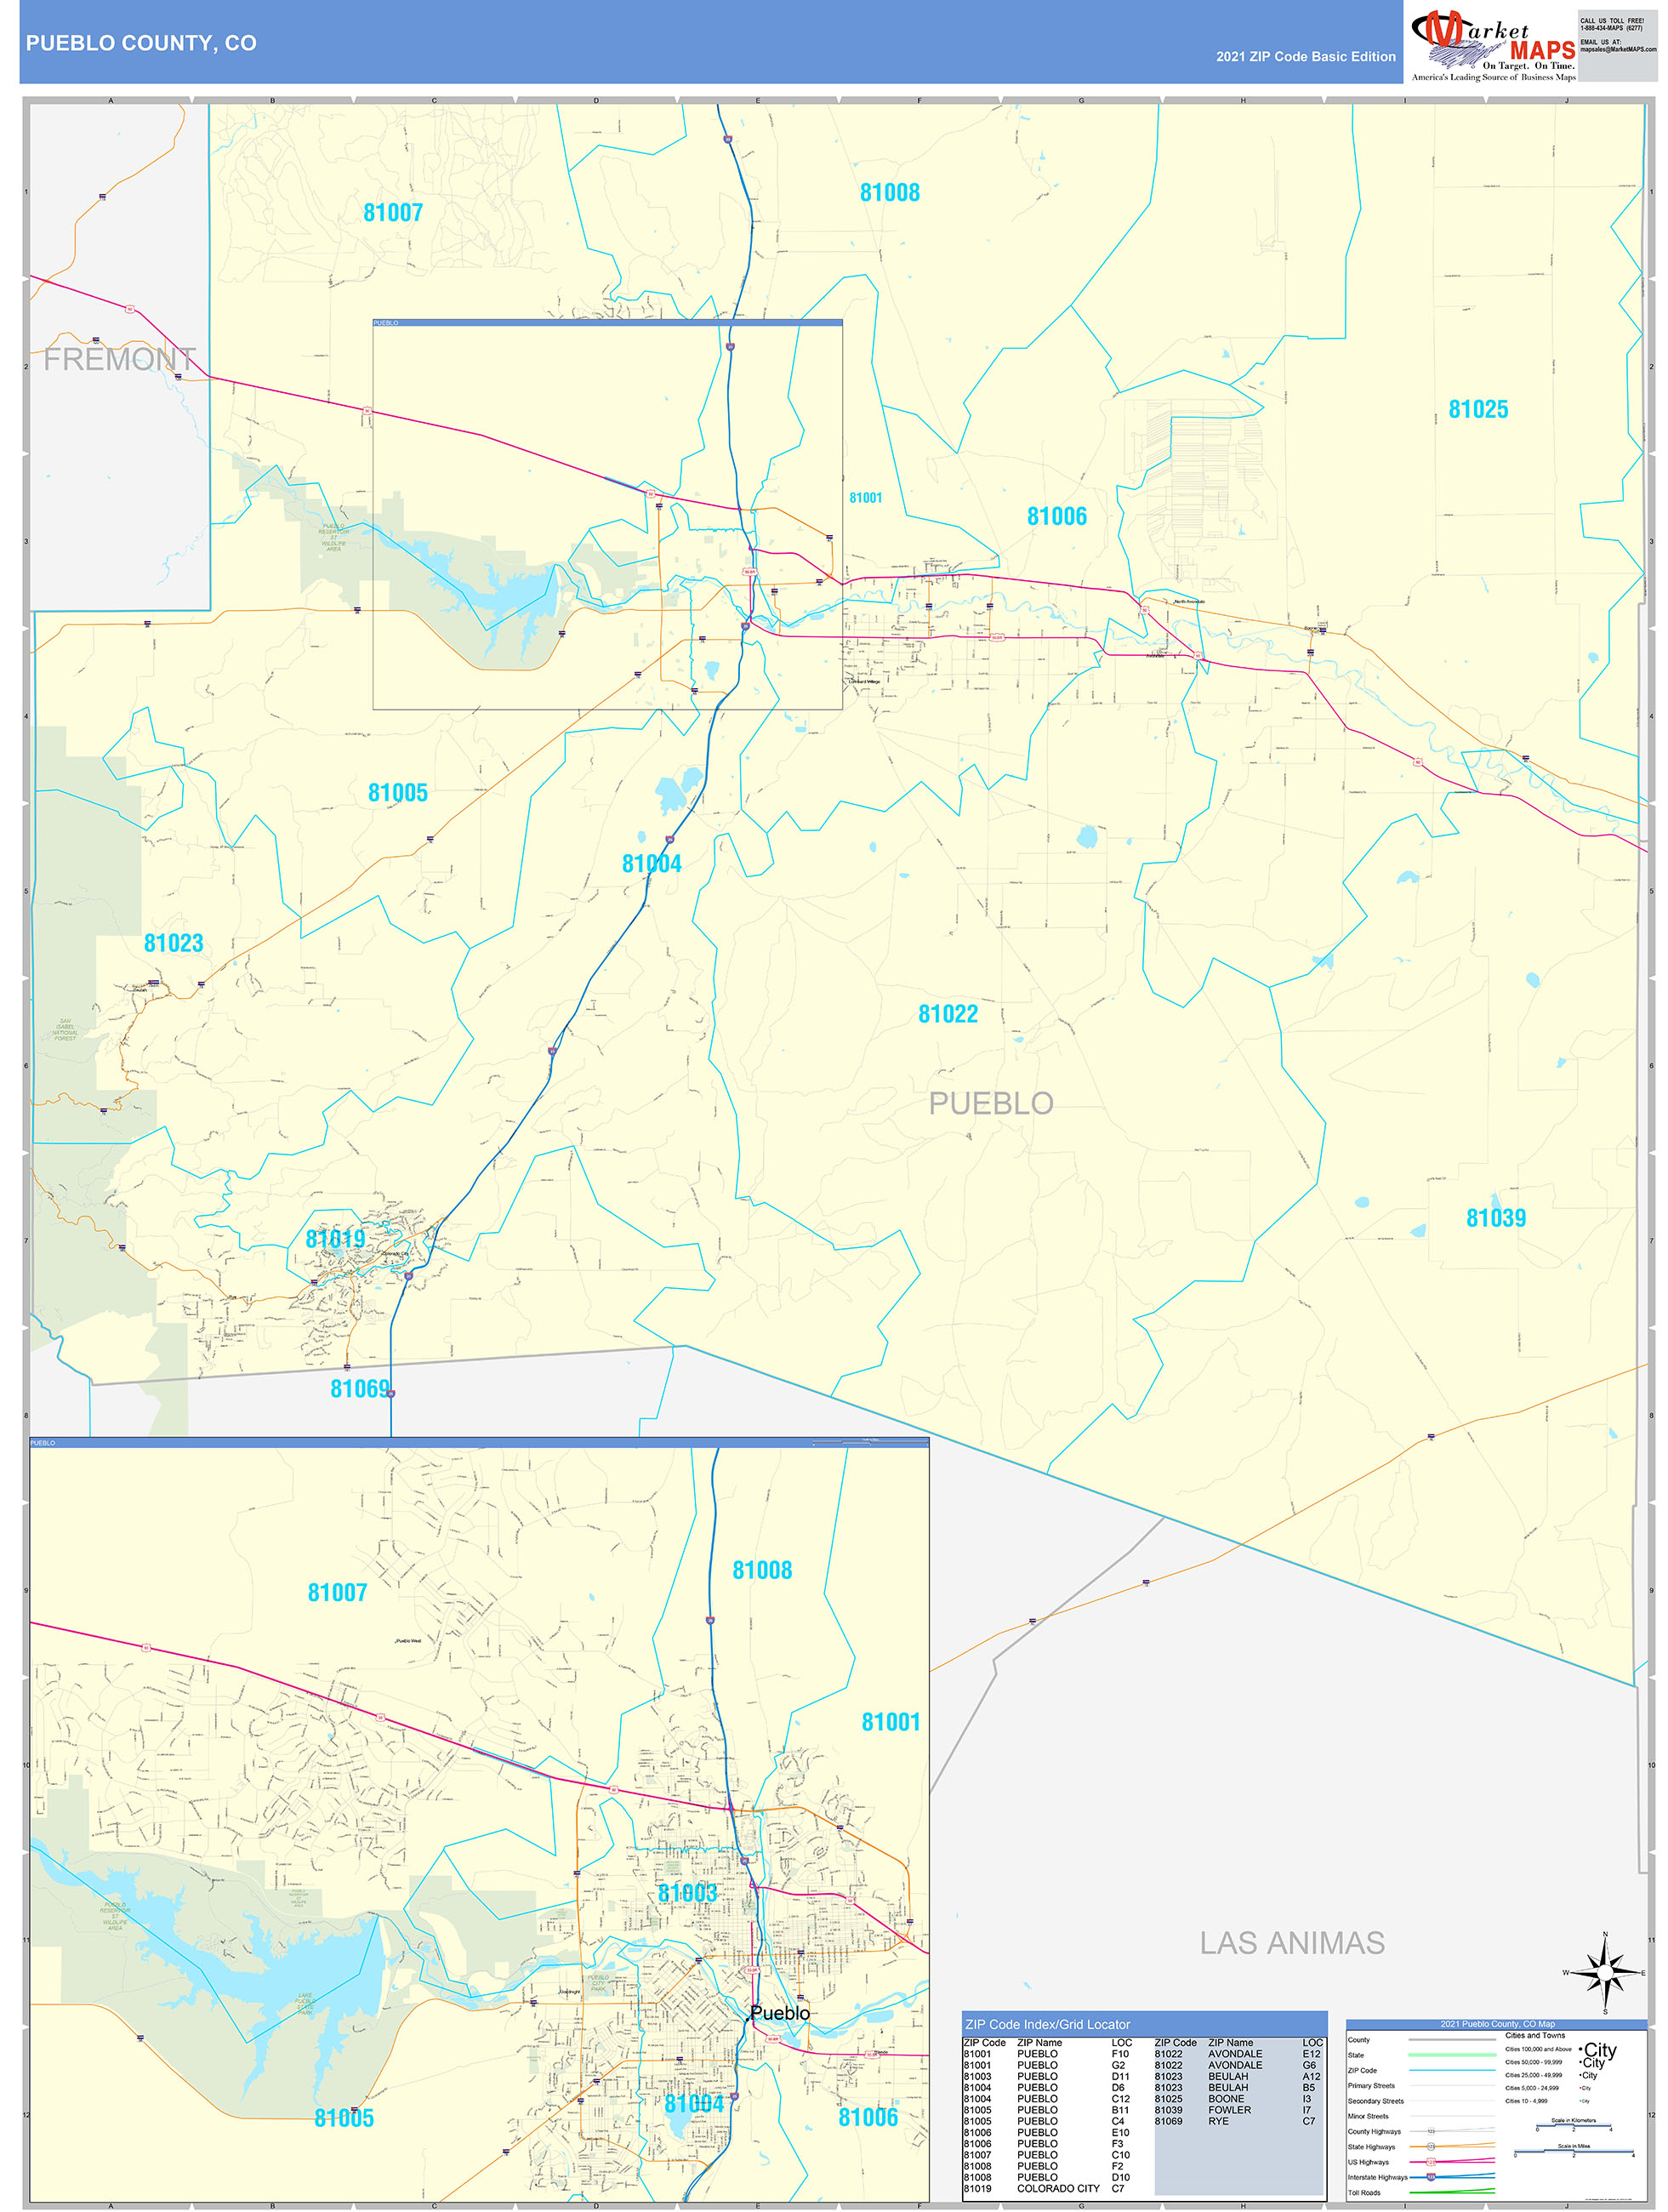 Pueblo County Co Zip Code Wall Map Basic Style By Marketmaps